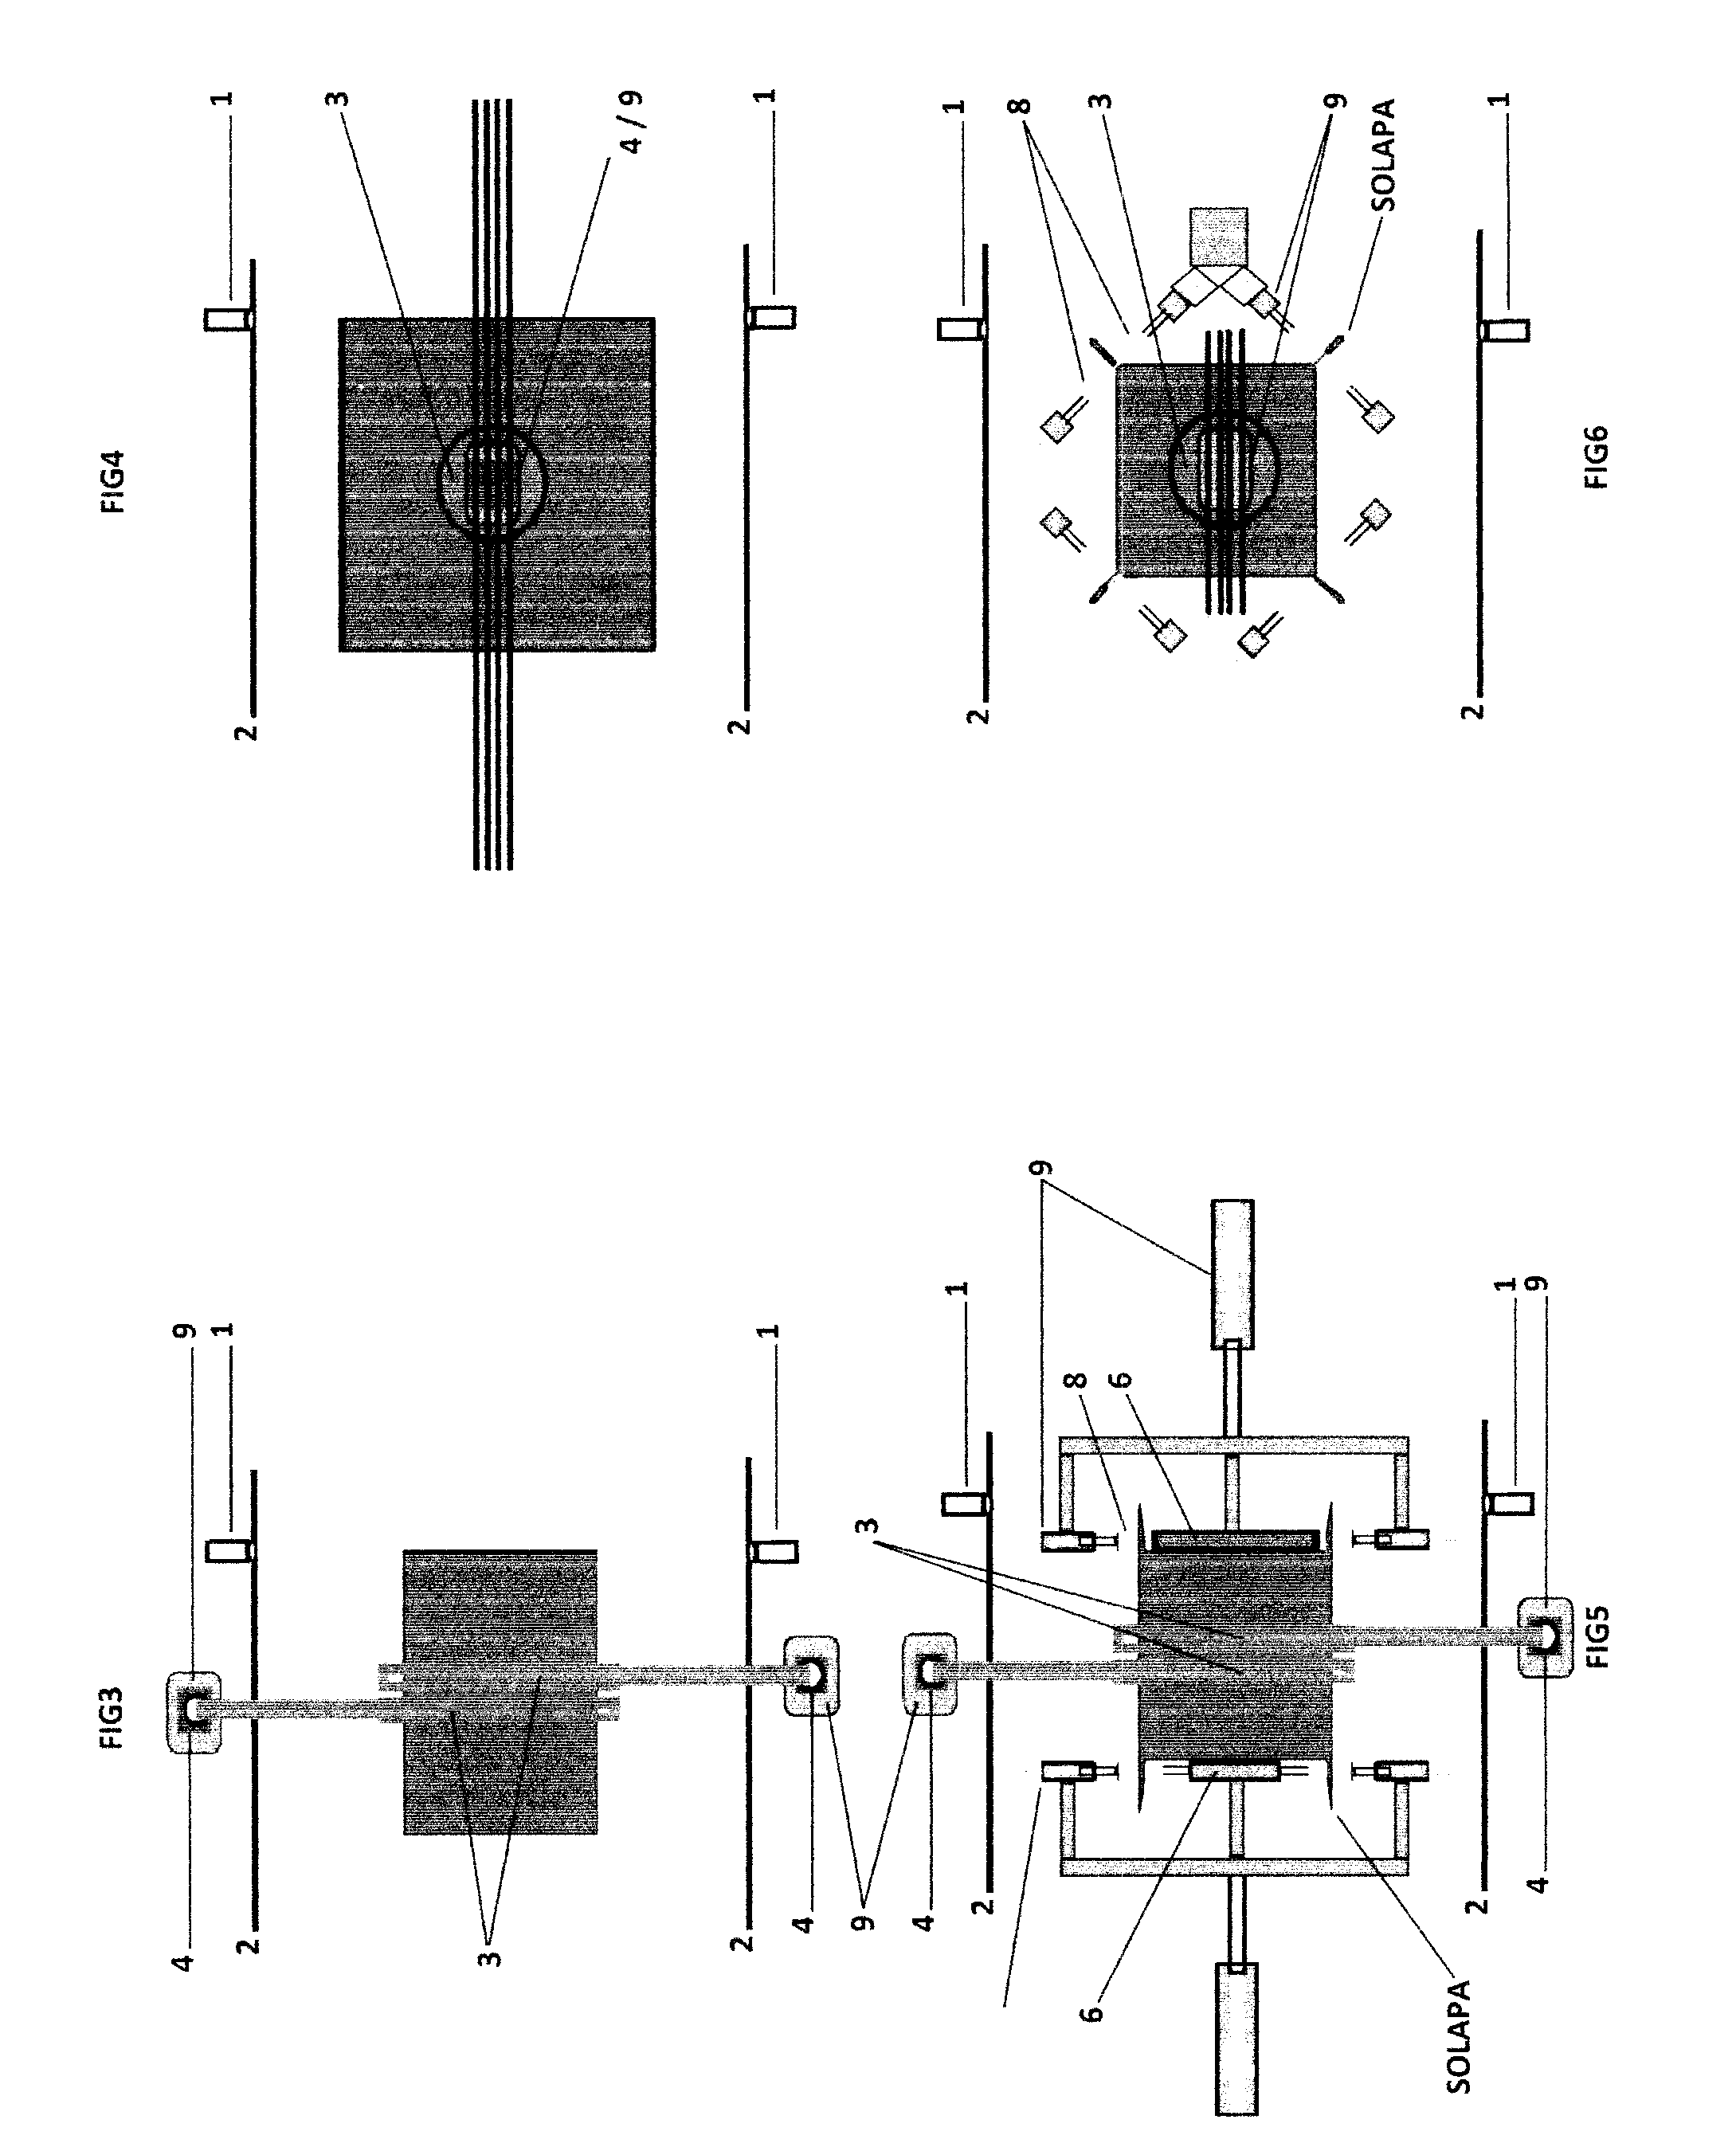 Method and Machines for Transforming Initial Sealed Packagings into Irregular Cubic or Polyhedral Packagings by Means of Sealing and Cutting Flaps